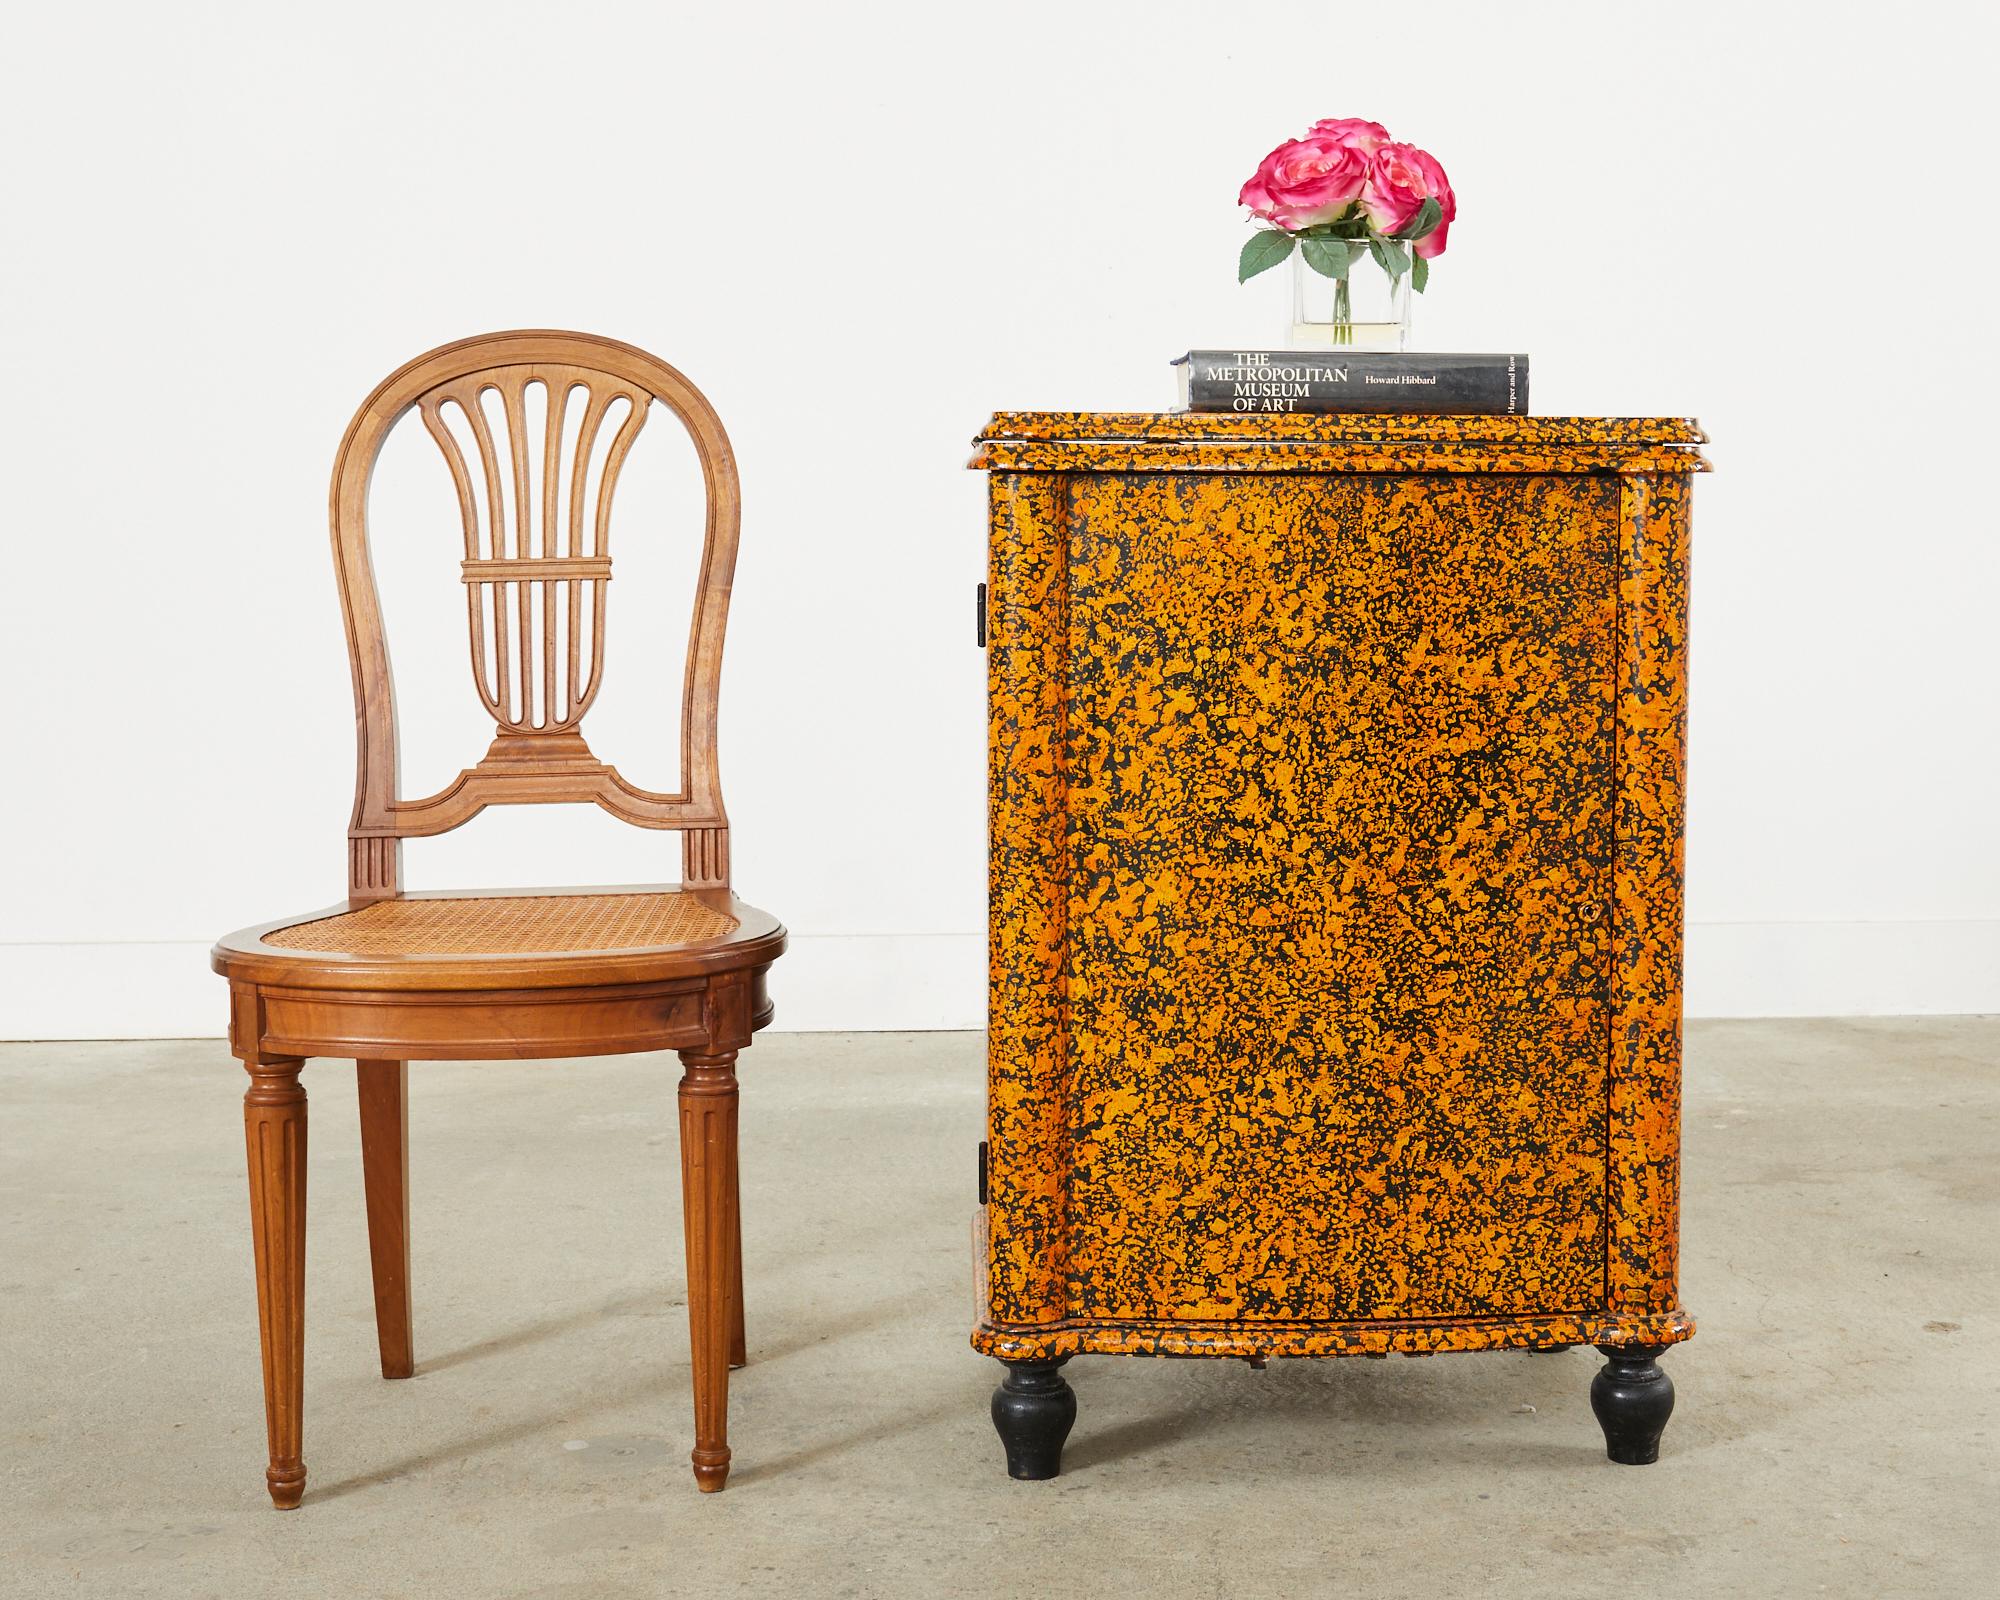 Folk art sewing table that has been repurposed as a cupboard and lacquer speckled by artist Ira Yeager (American 1938-2022). The cupboard features a flip top over a wood case fronted by a large door. The inside has open storage area with small